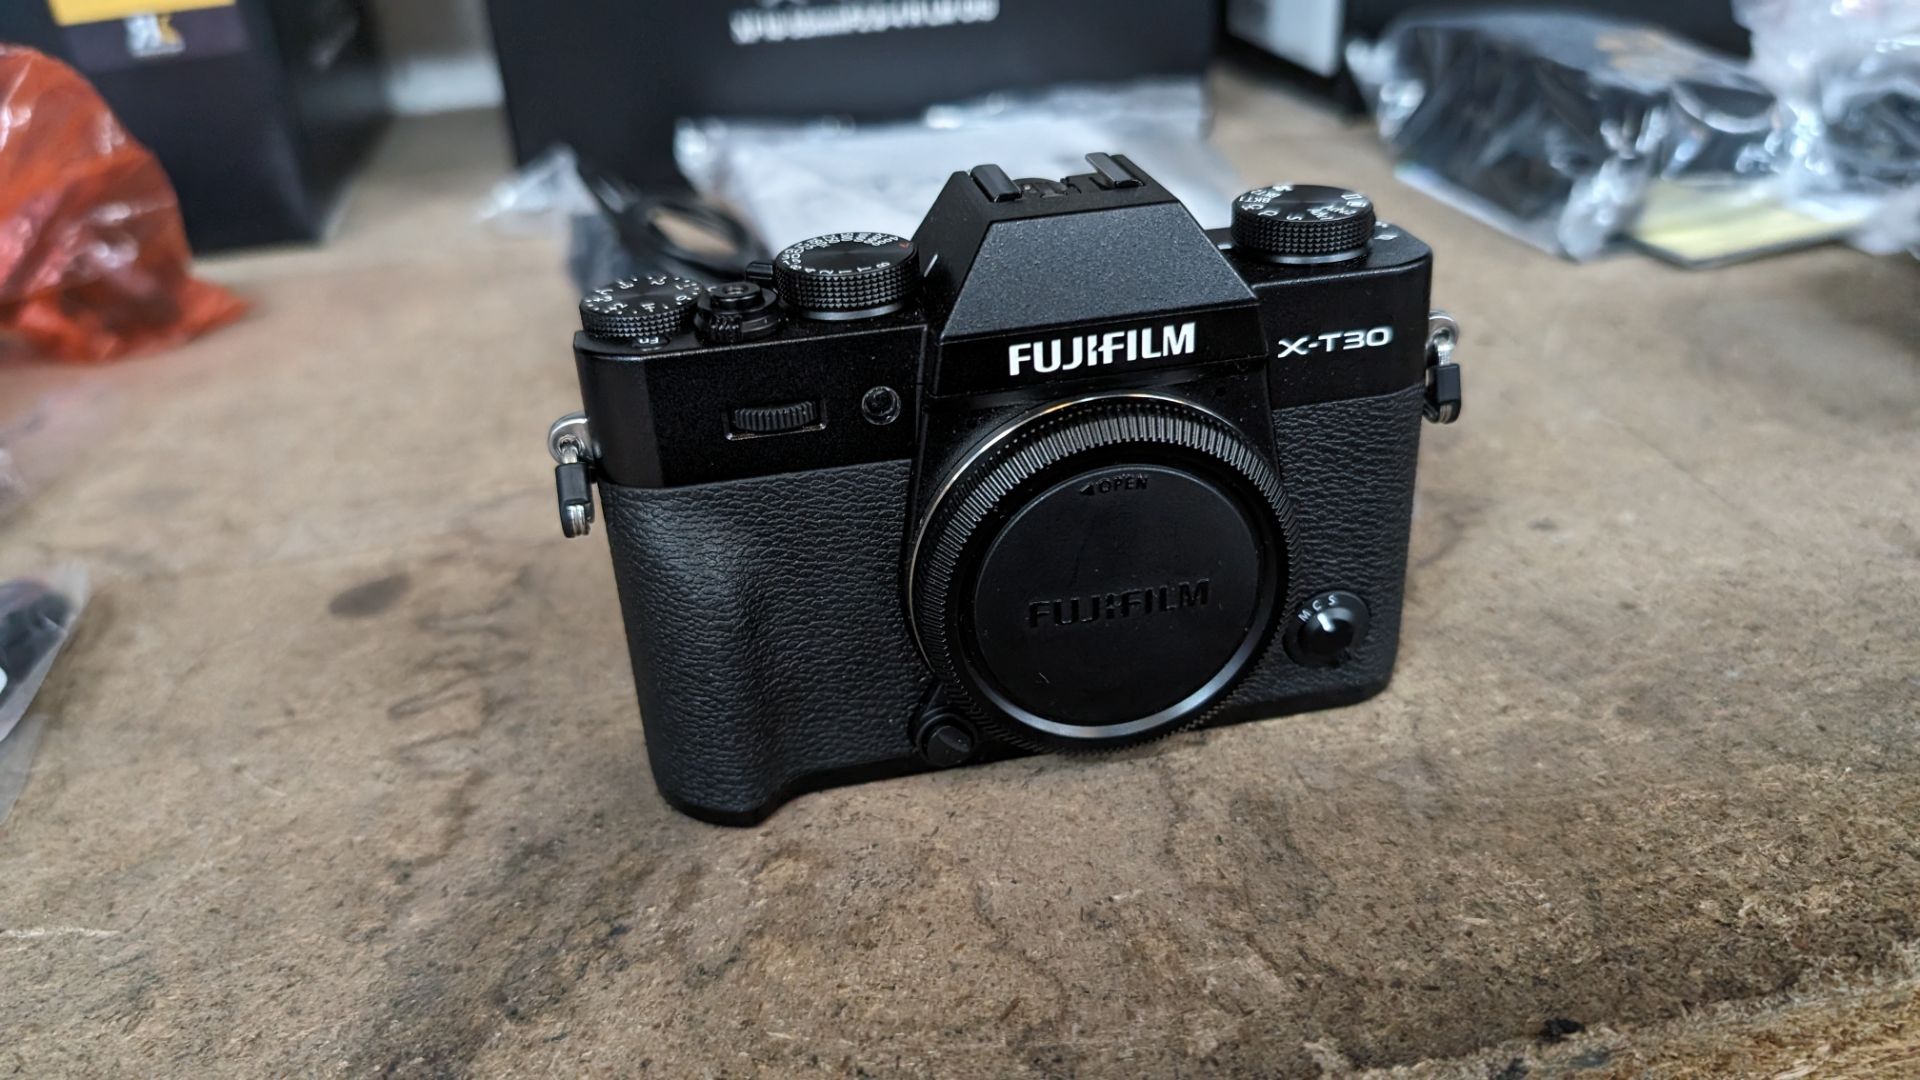 Fujifilm X-T30 II camera, including battery, cables, strap and more. NB: no lens